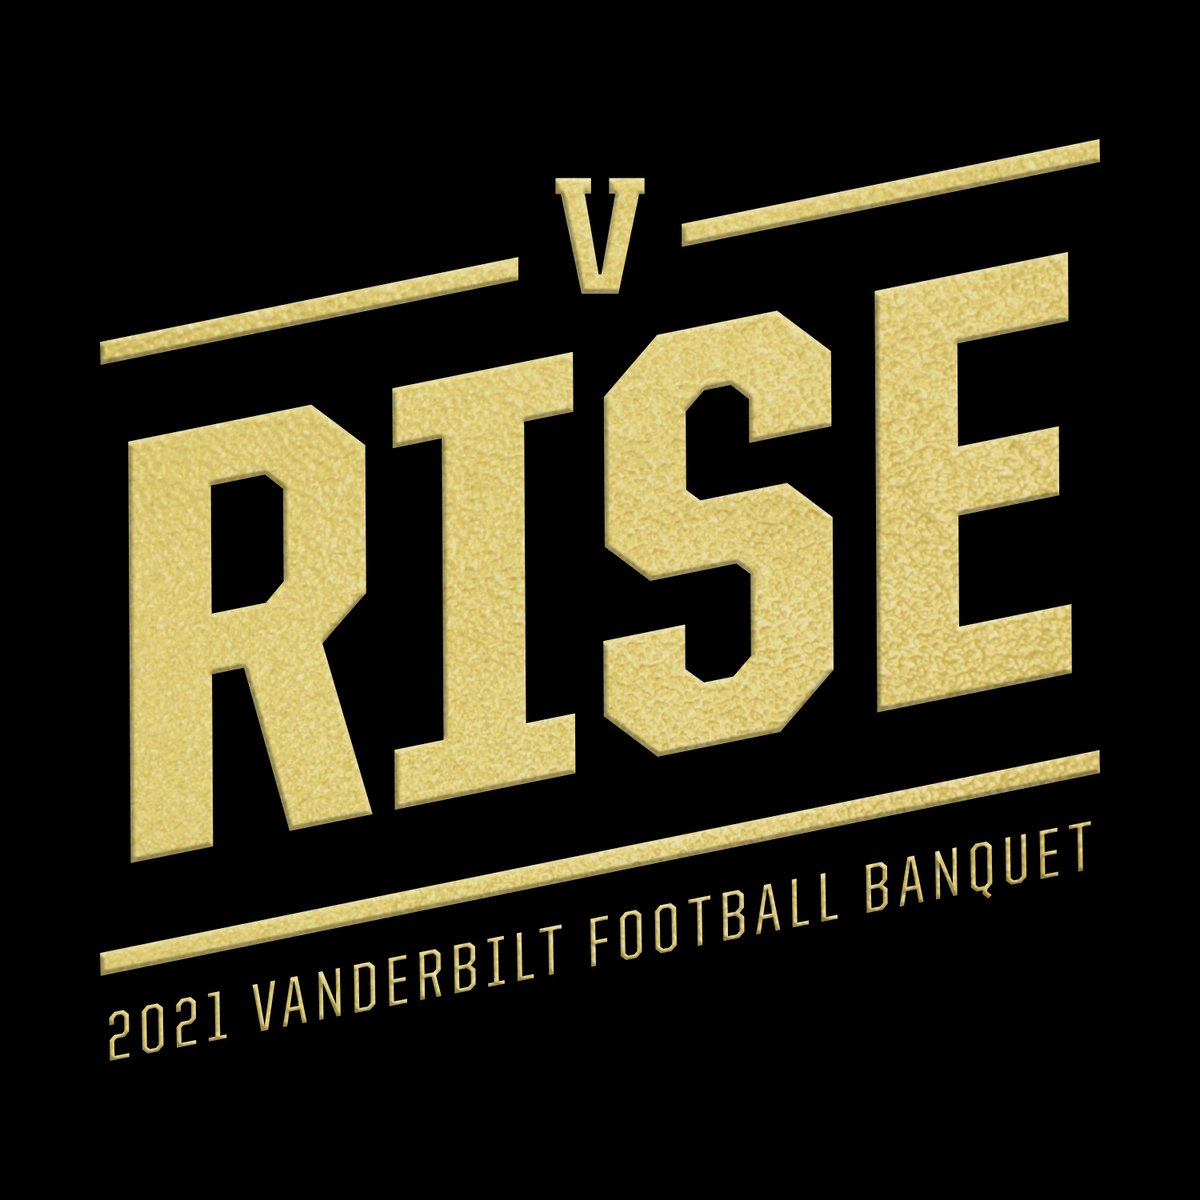 On the 𝖗𝖎𝖘𝖊 ⚓️⬇️ Proud to recognize and honor the members of Team 1. 📰 vanderbi.lt/ye4fq